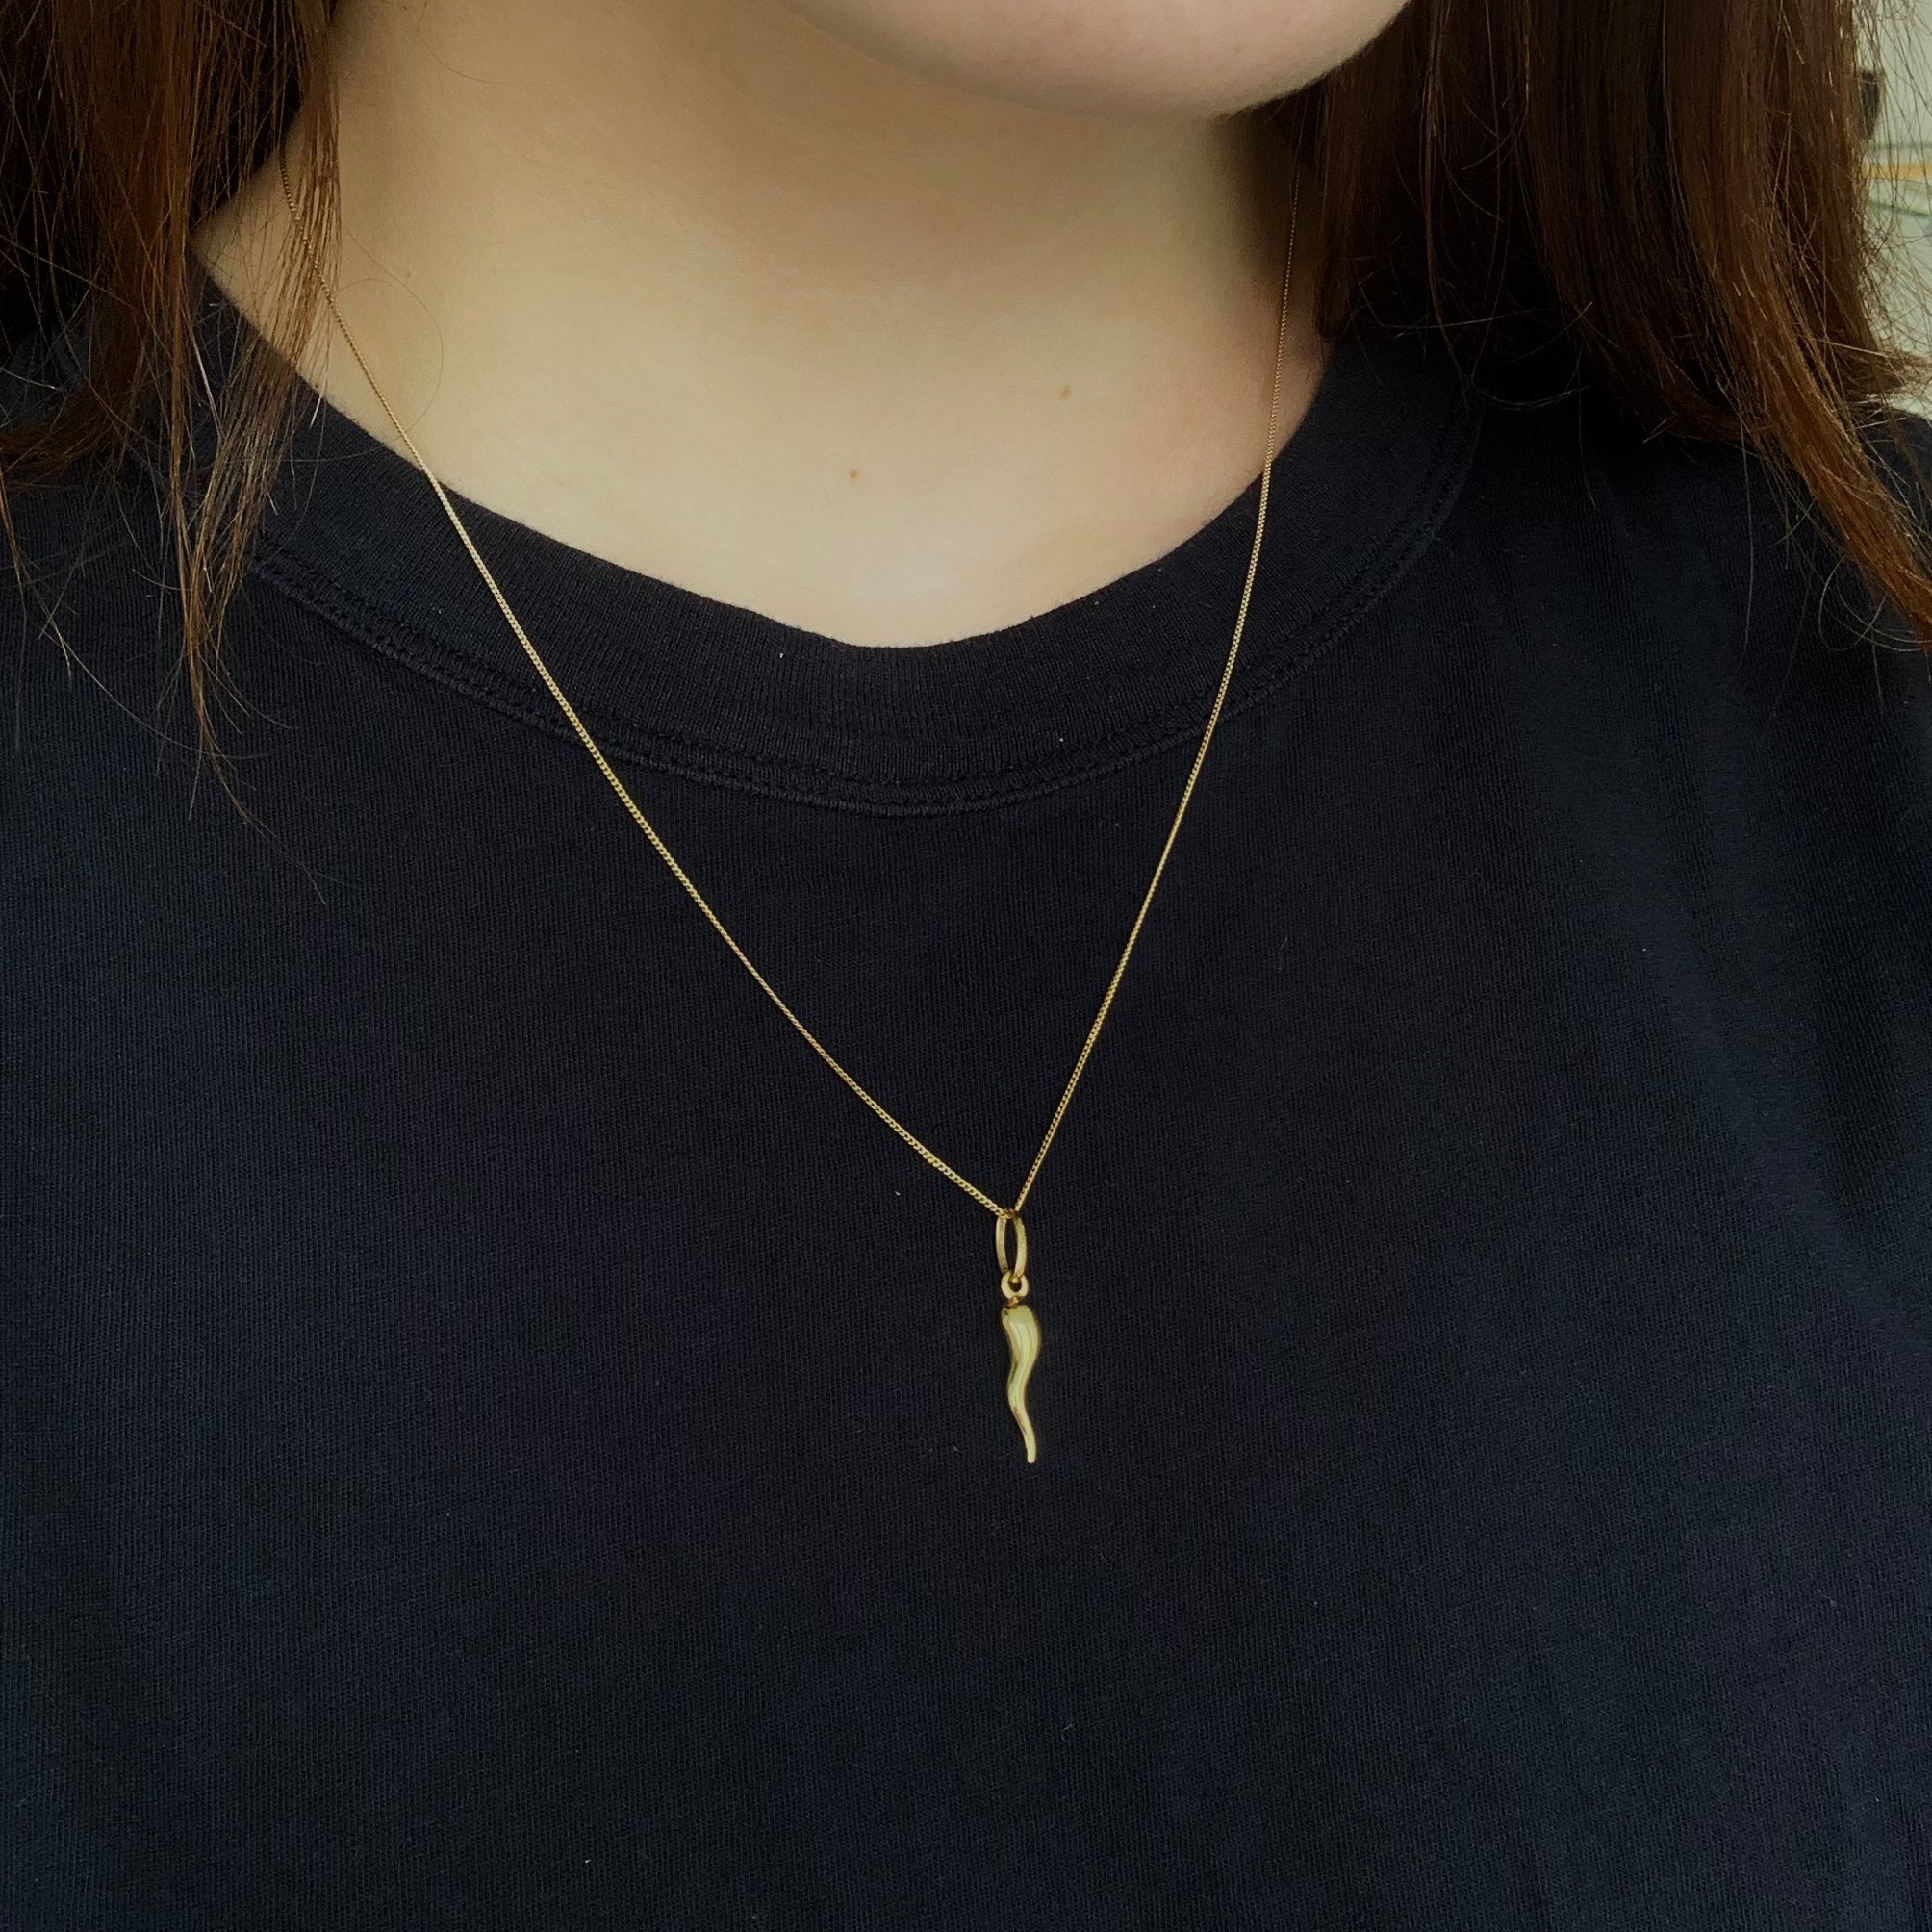 10k solid yellow gold good luck horn on a 20" thin curb chain necklace